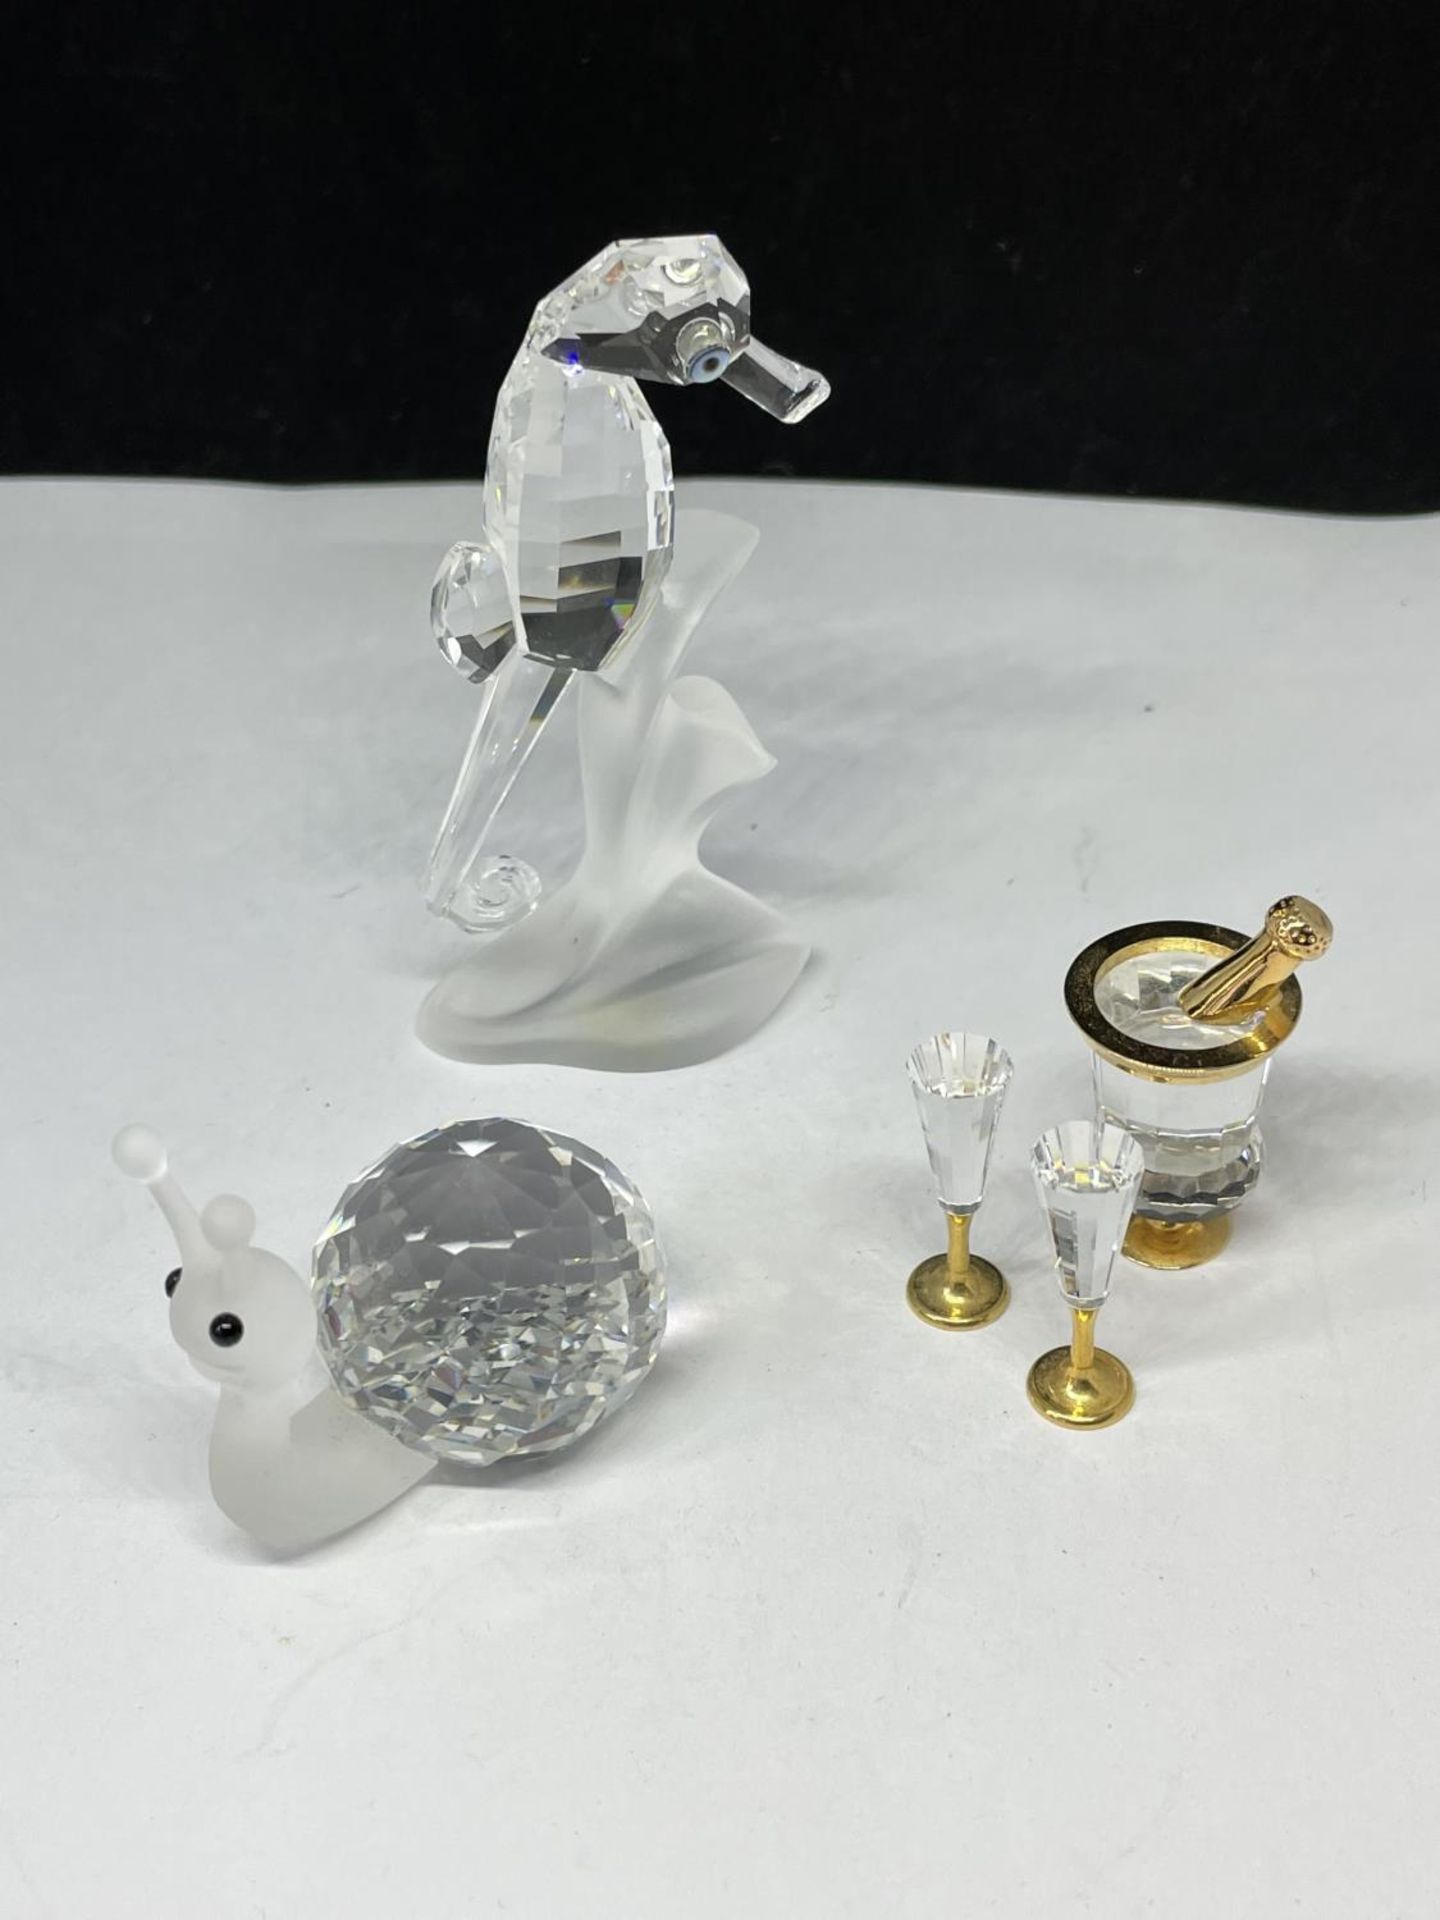 THREE SWAROVSKI CRYSTALS TO INCLUDE A SEAHORSE, SNAIL AND CHAMPAGNE BUCKET WITH BOTTLE AND FLUTES